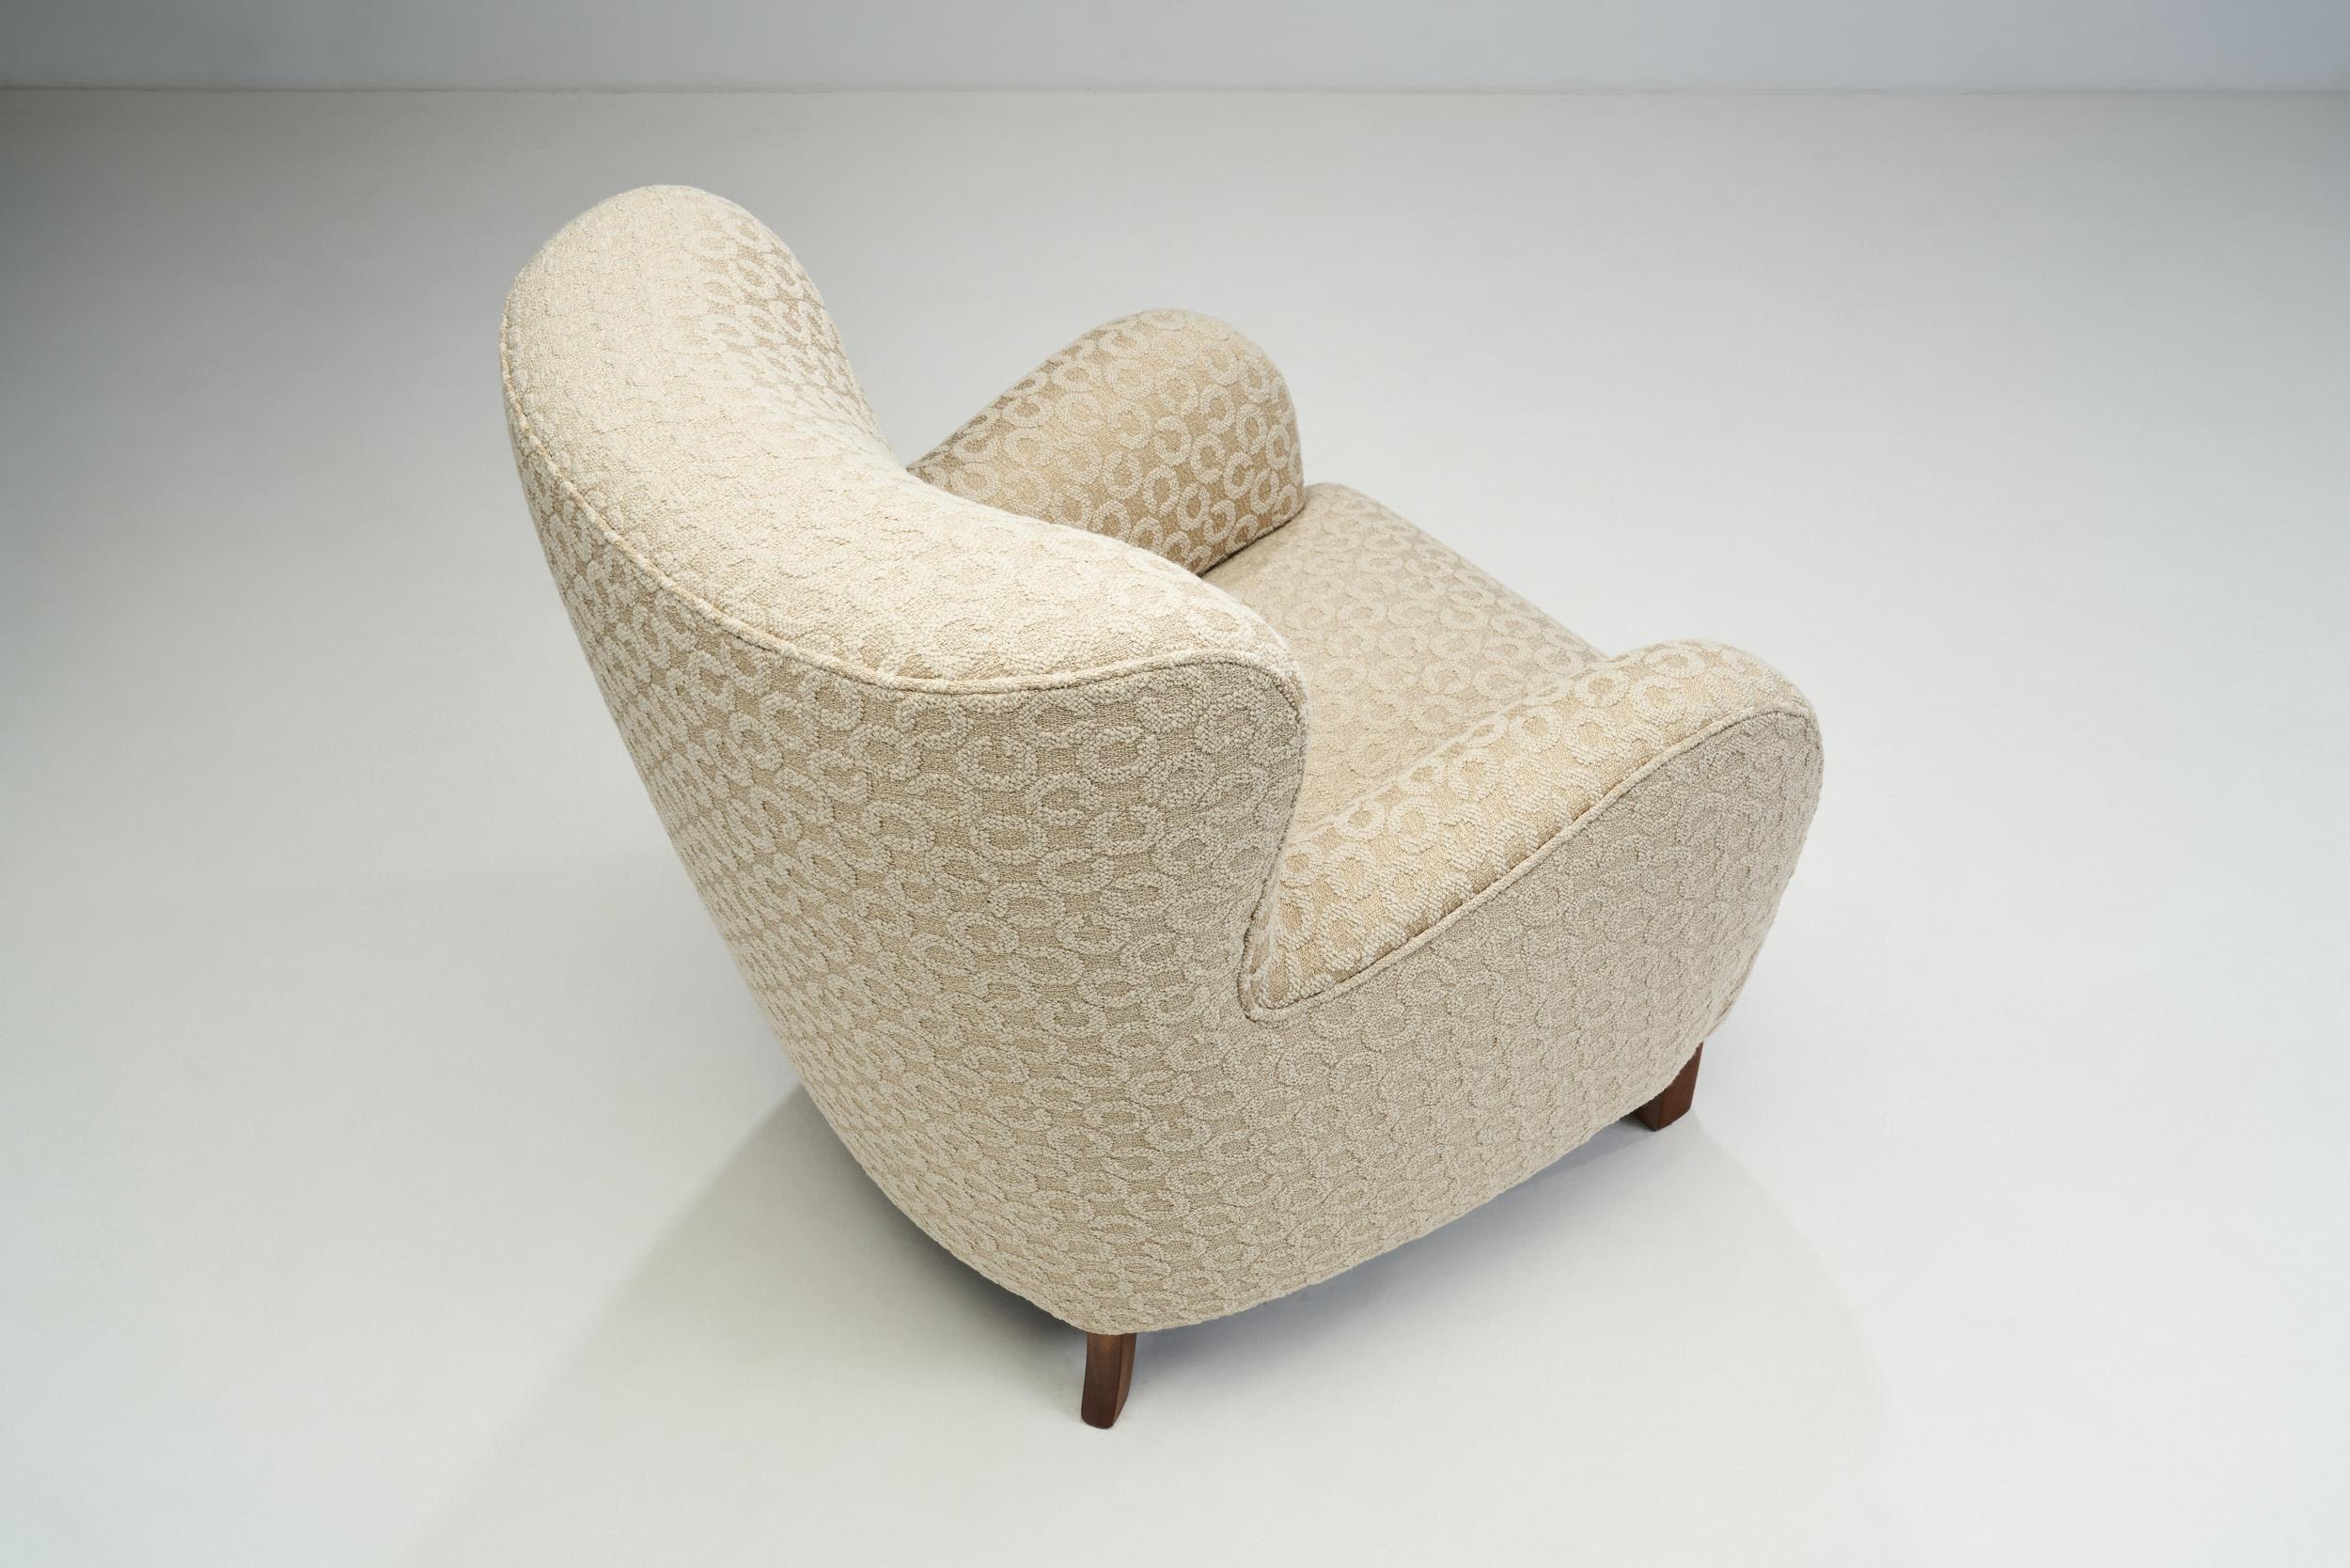 Fabric Danish Cabinetmaker Armchair with Patterned Upholstery, Denmark, 1940s For Sale